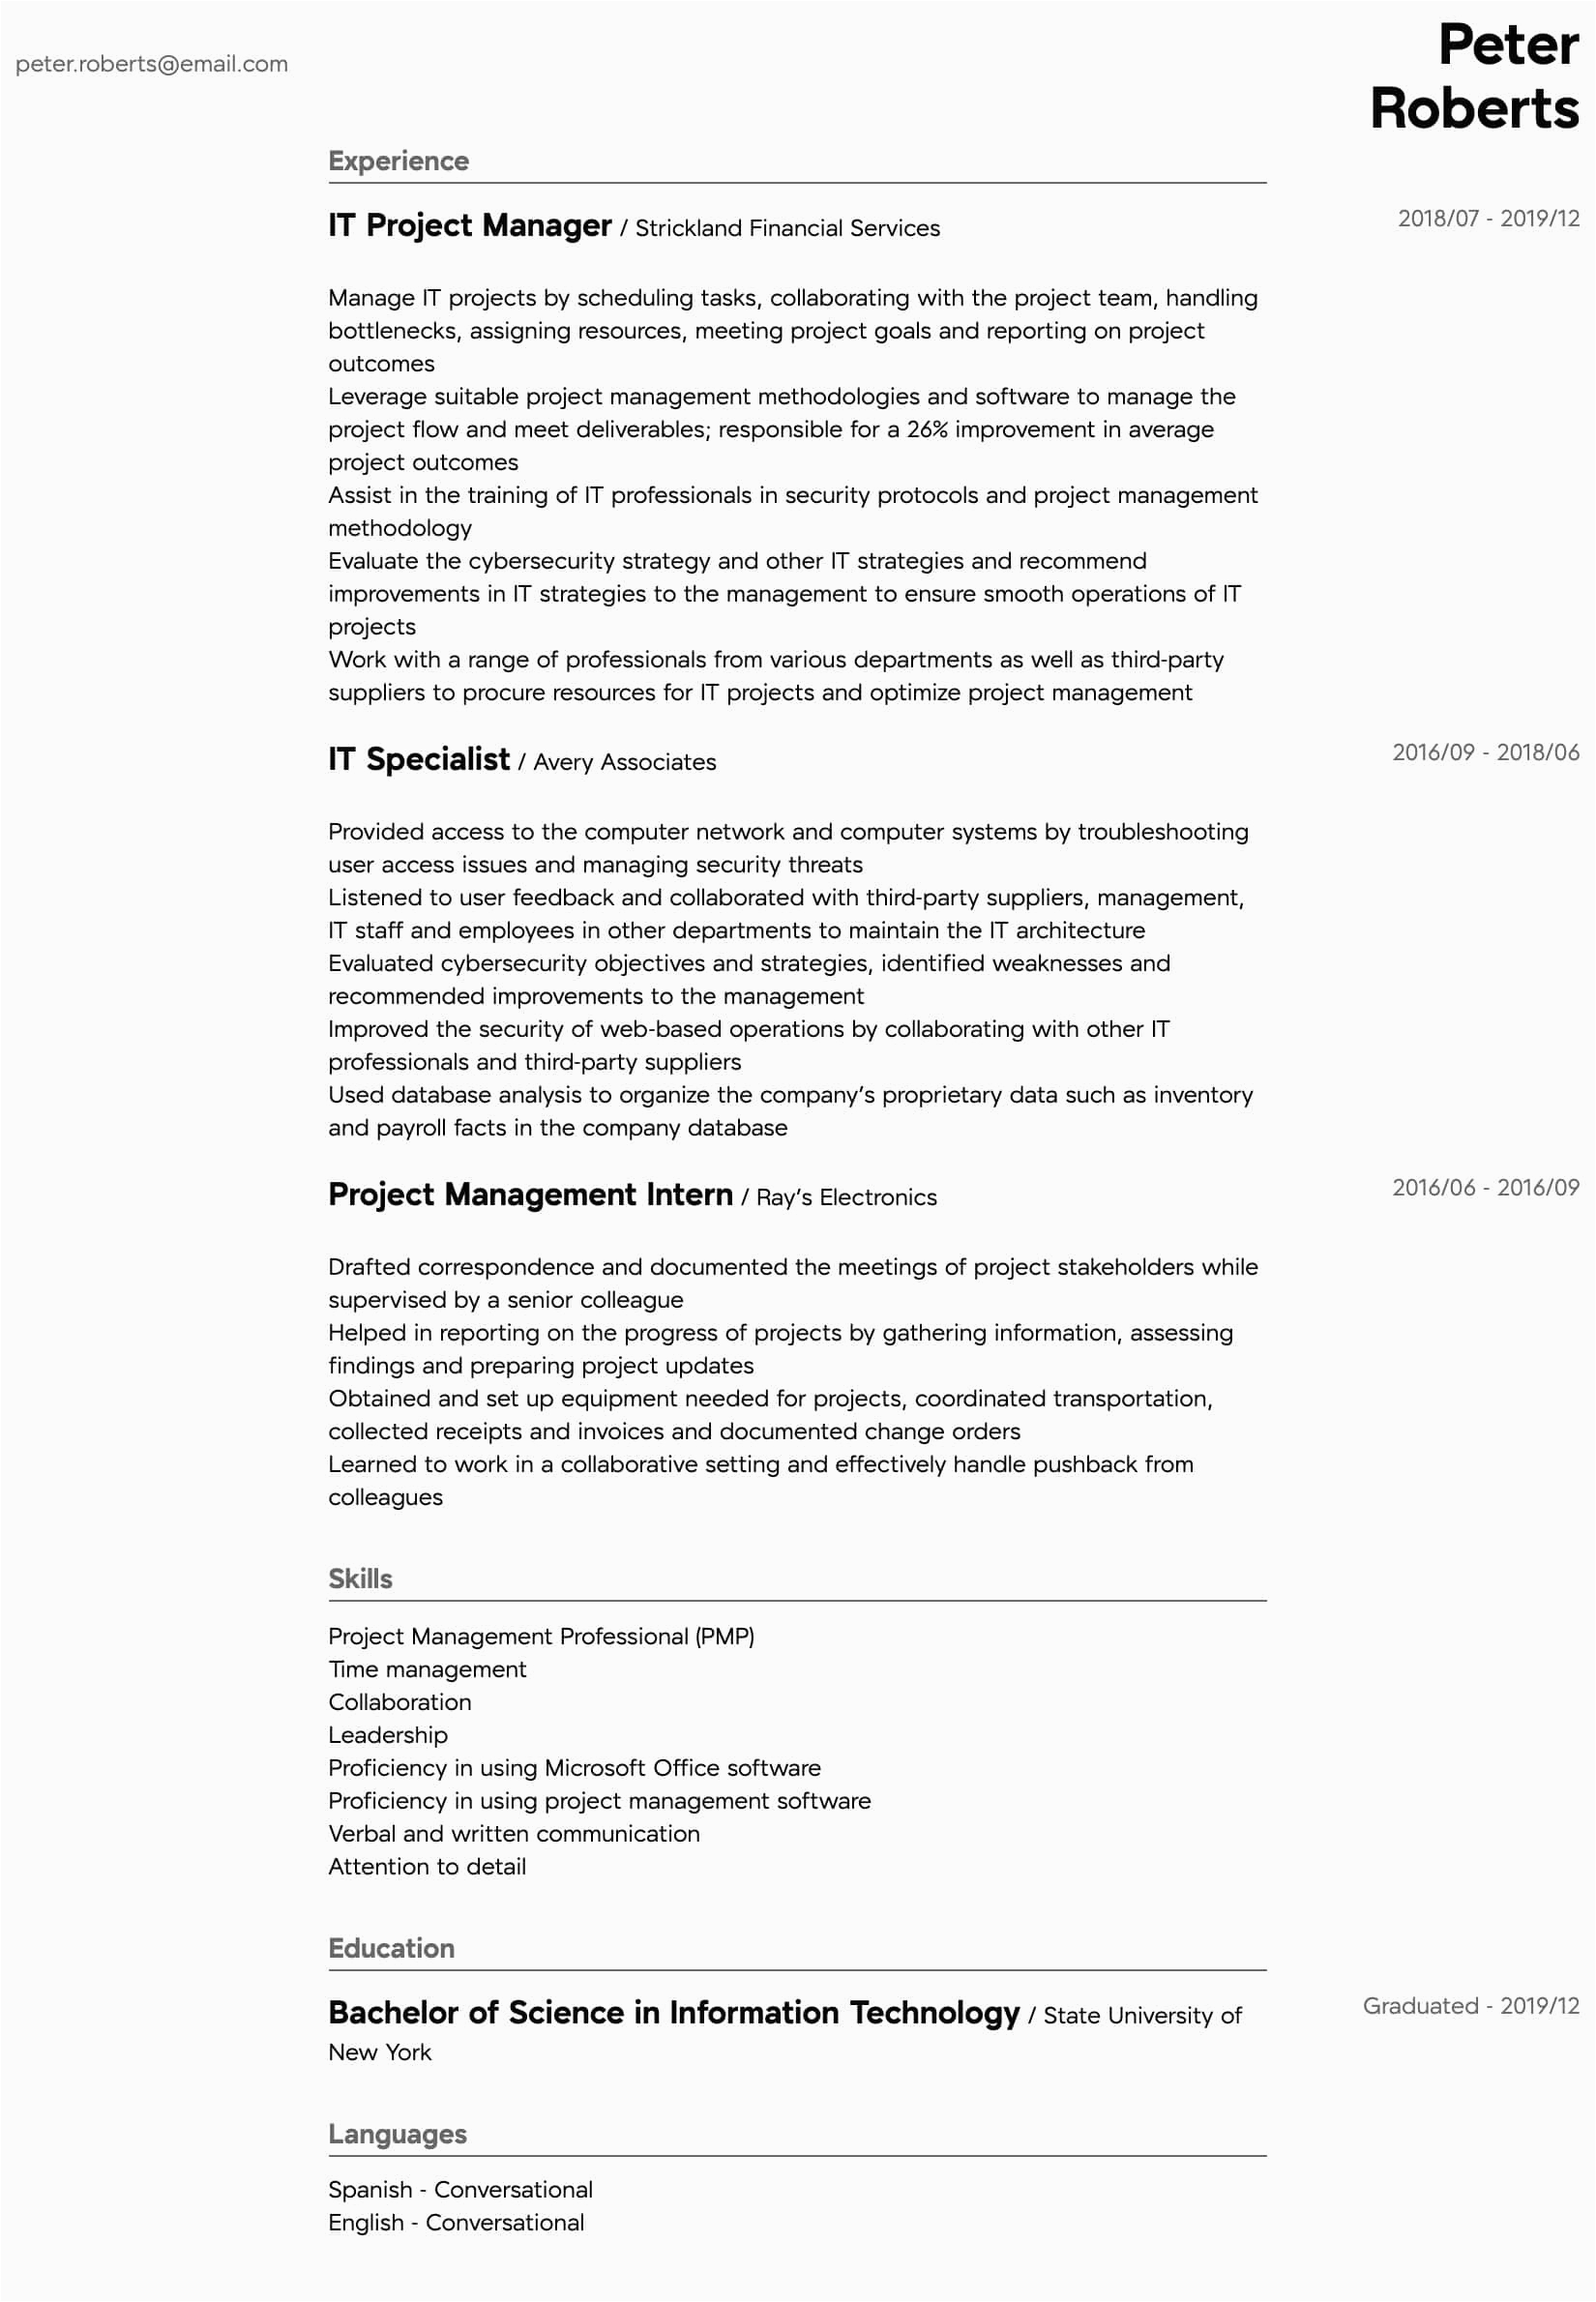 Resume Sample for 5 Year Experience Technology Information Technology Resume Samples All Experience Levels